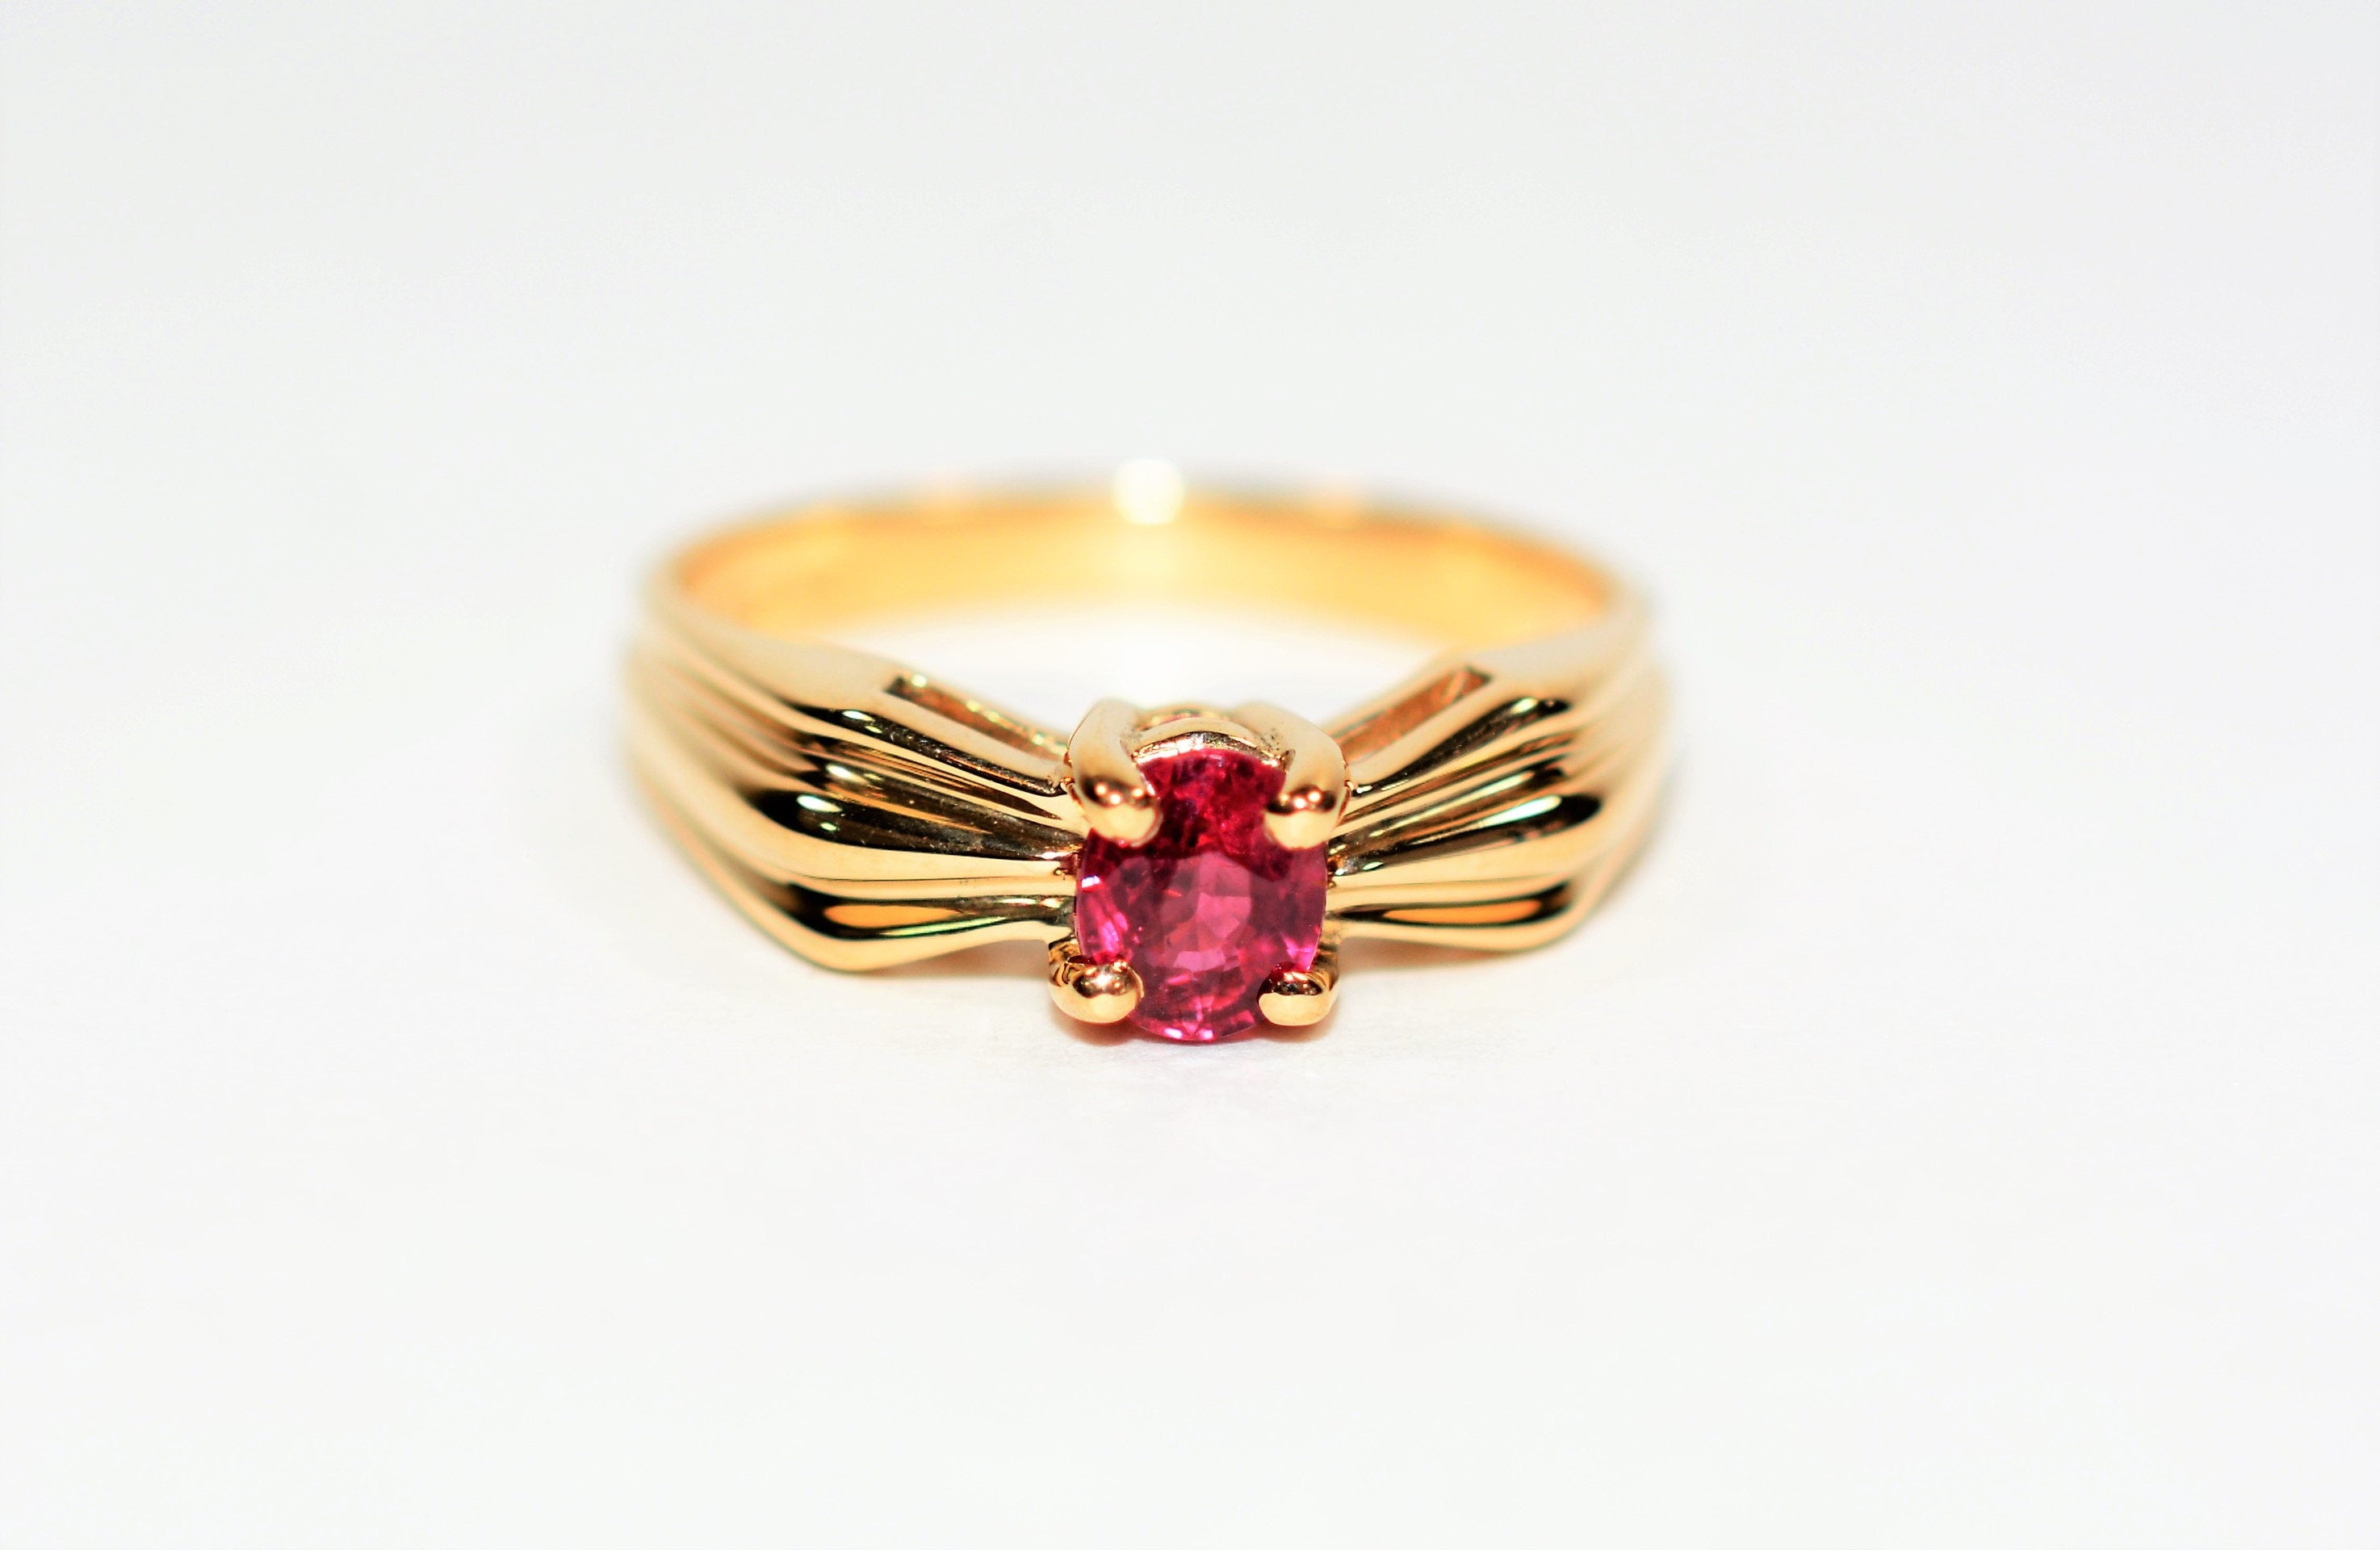 Certified Natural Ruby Ring 14K Solid Gold .57ct Solitaire Birthstone Fine Gem Estate Jewelry